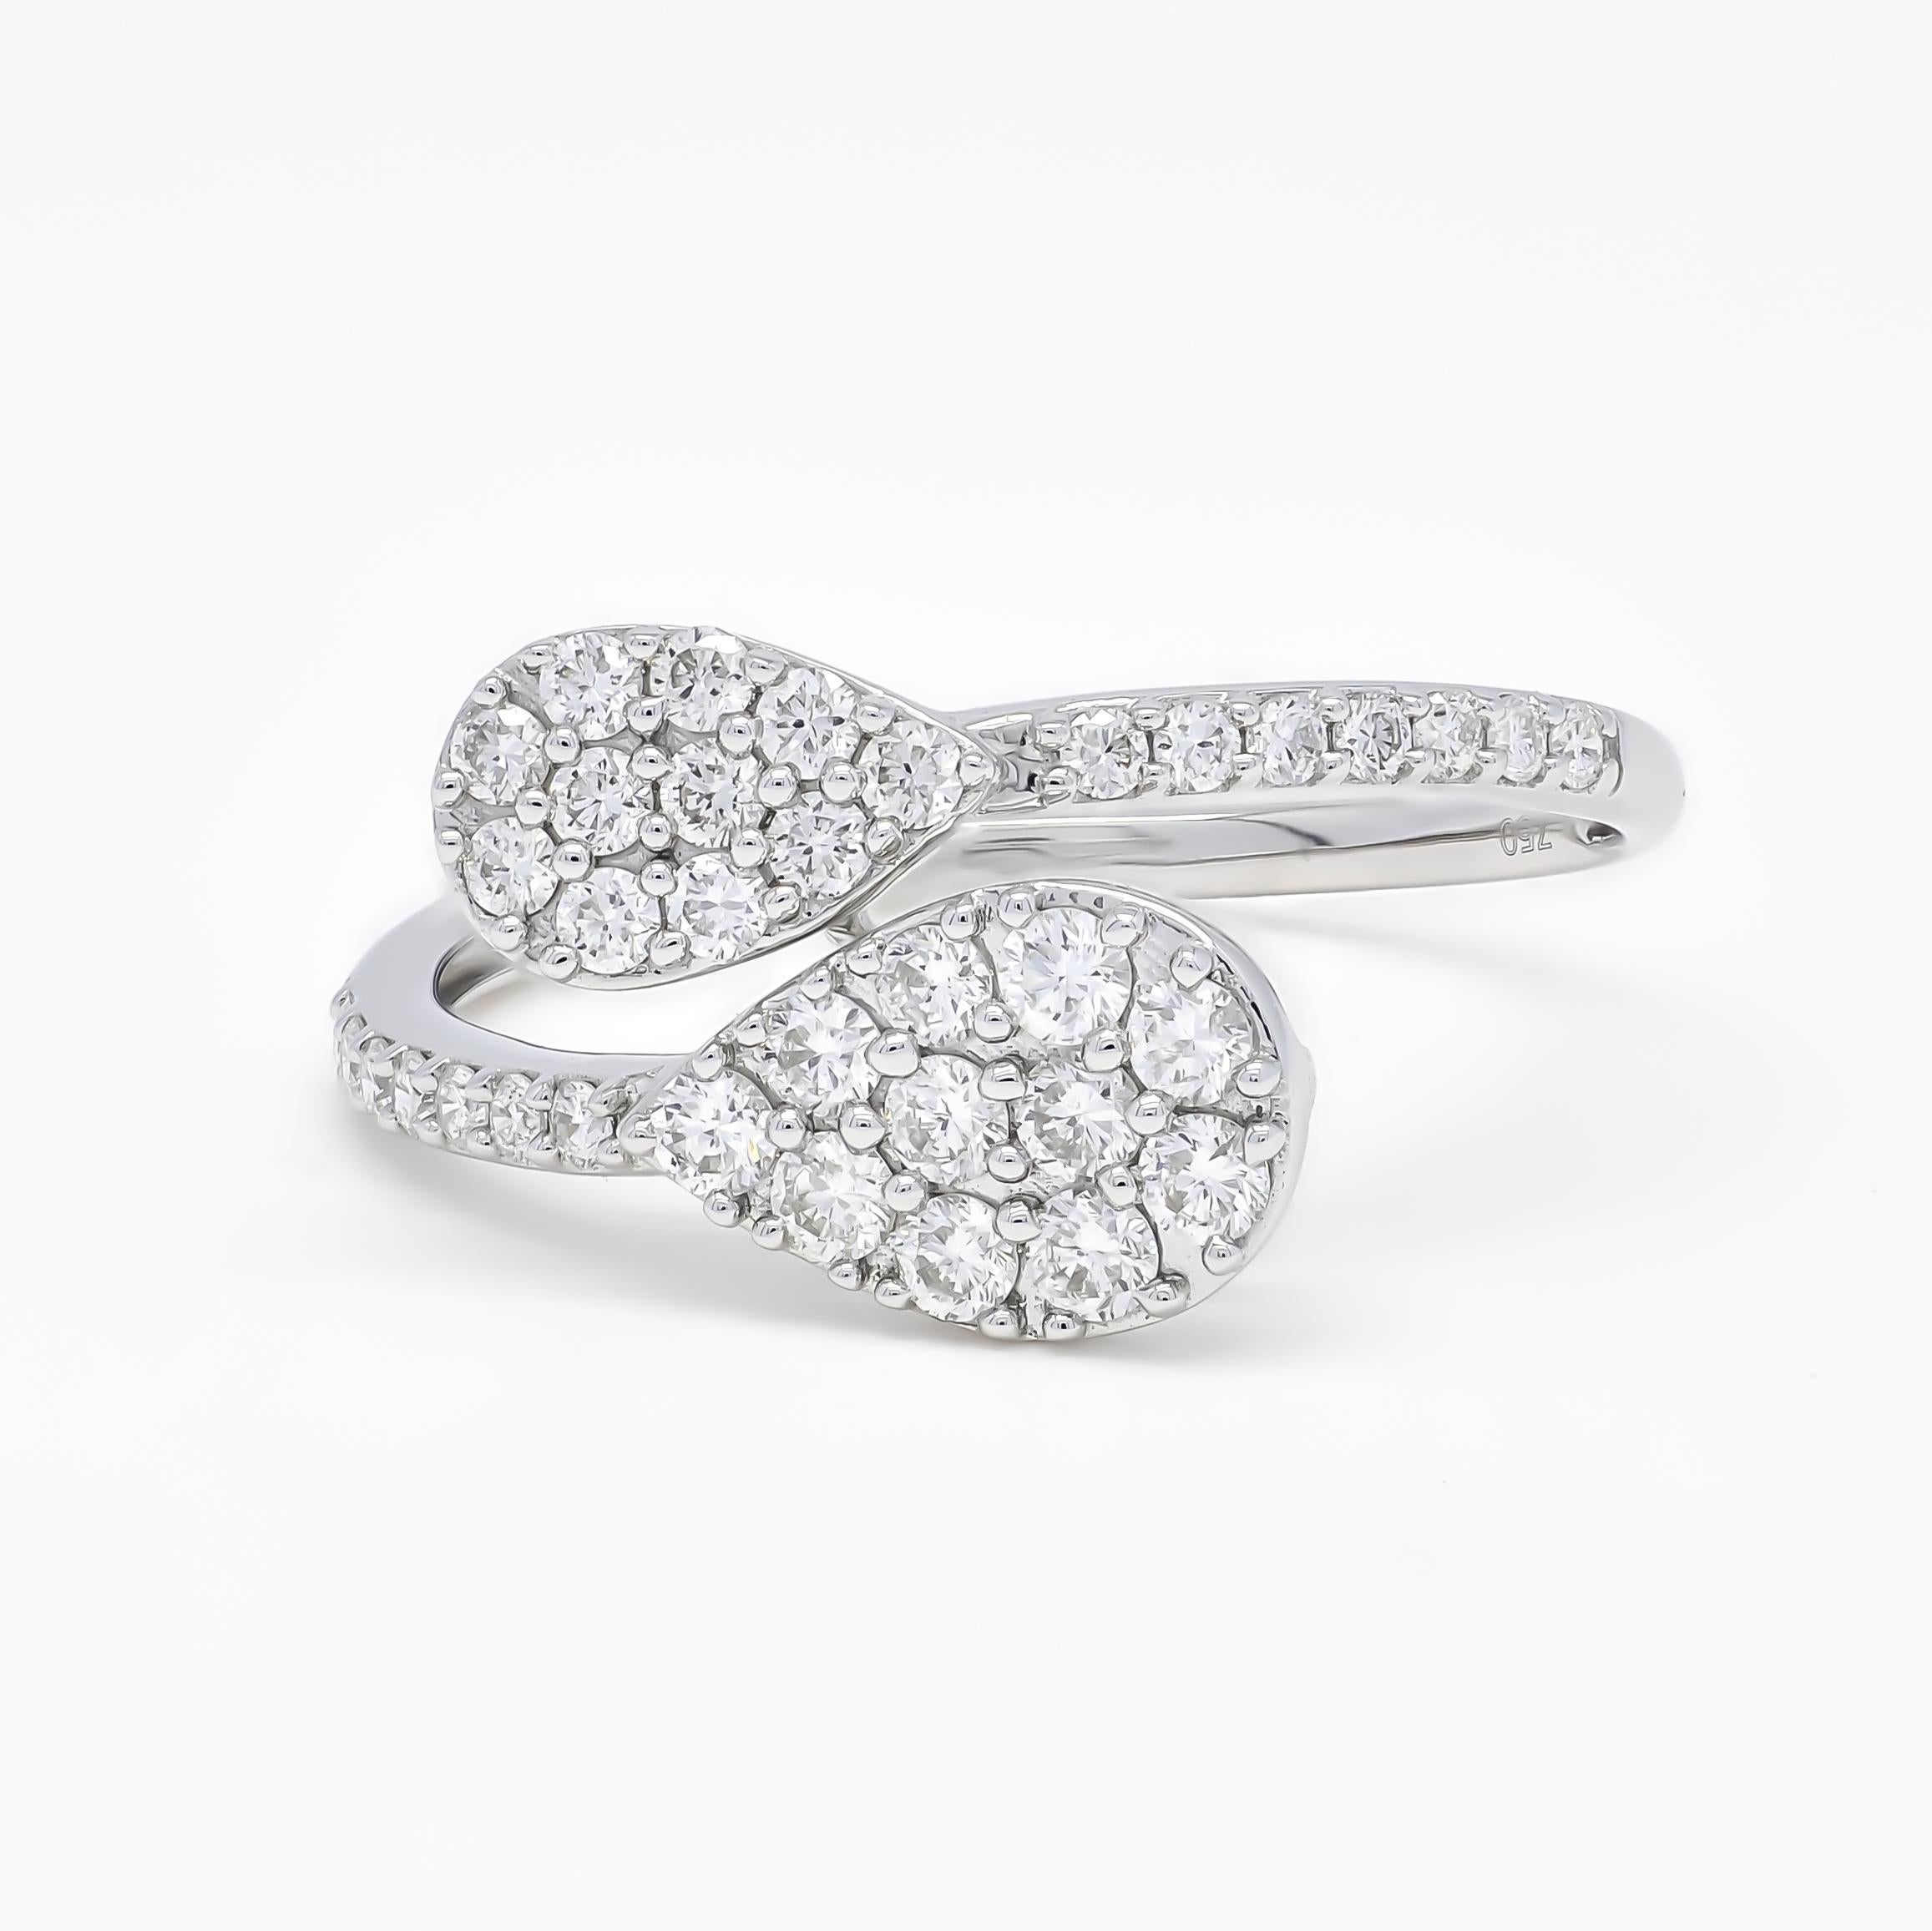 Dazzling round-cut diamonds form a spectacular cluster in this stunning white gold duo cluster ring in Bypass Spilt Shank.  The Cluster are  Pear/ Drop Shape, giving an illusion of solitaire Diamonds.

Make a statement with a stunning Duo Drop Shape